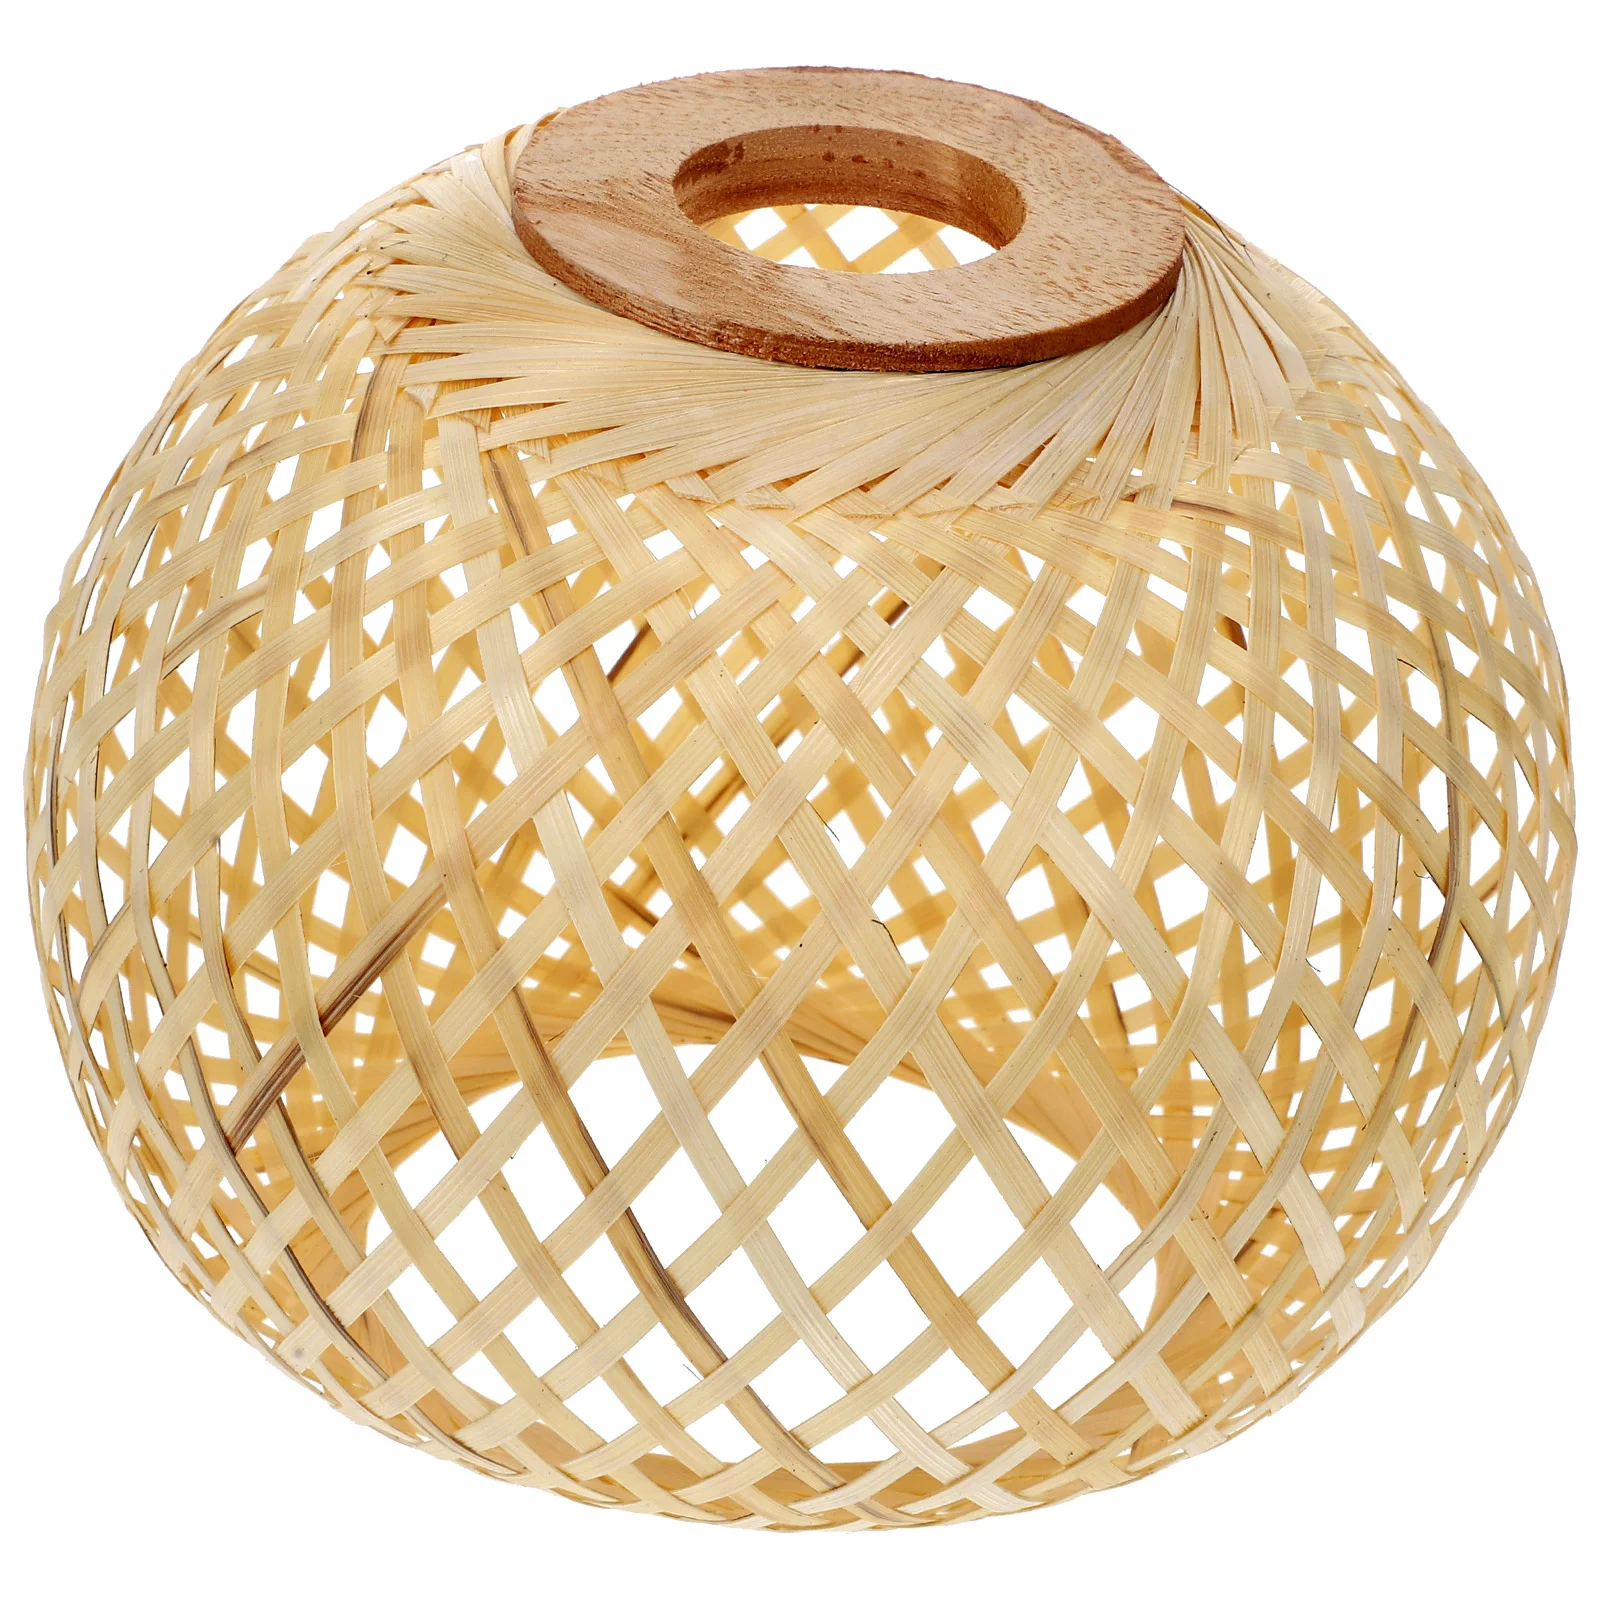 

Lamp Shade Light Shades Pendant Bamboo Woven Cover Lampshade Ceiling Hanging Rattan Wicker Rustic Chandelier Lampshades